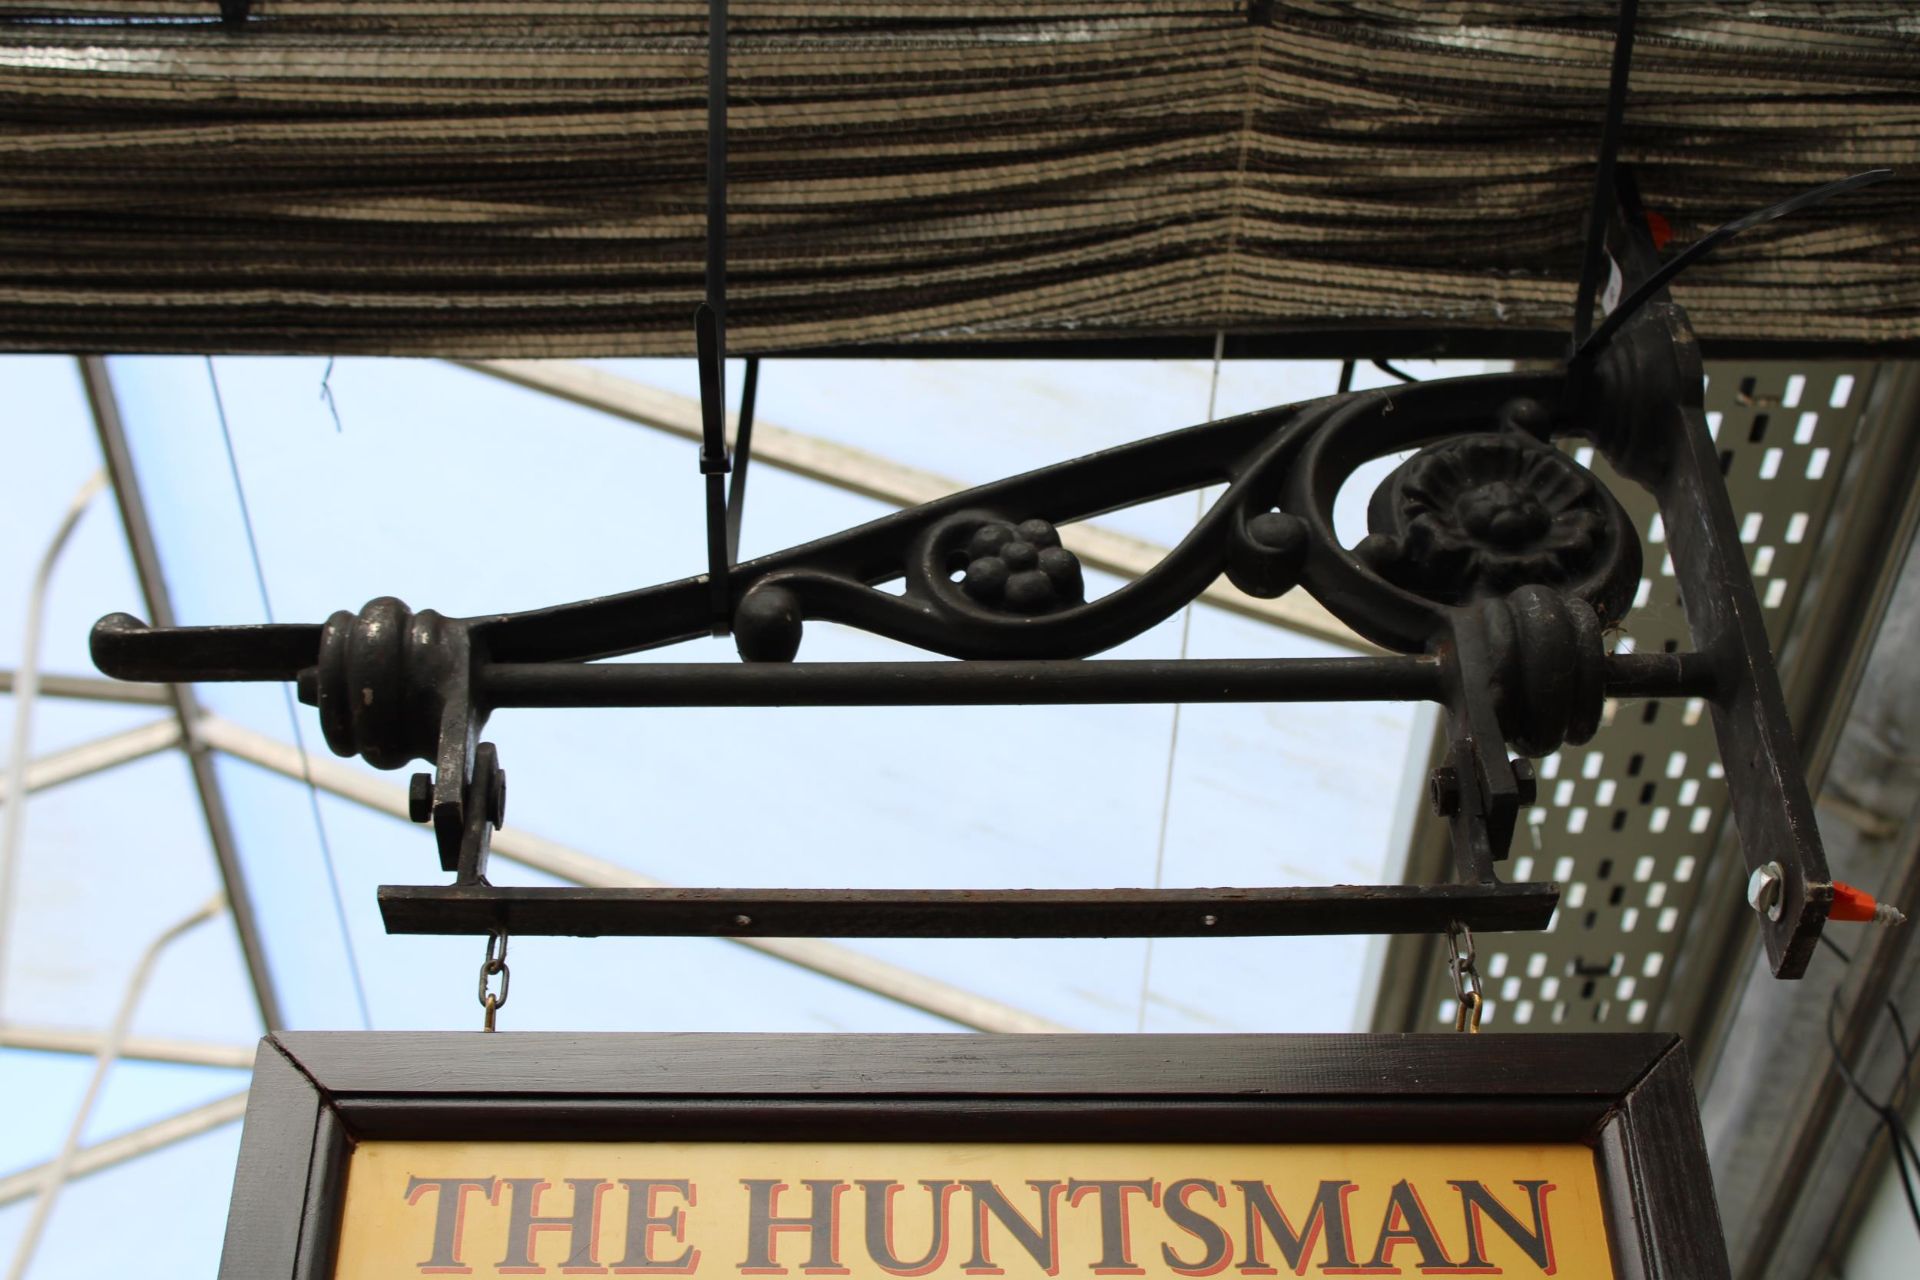 A DOUBLE SIDED WOODEN 'THE HUNTSMAN' PUB SIGN WITH CAST IRON WALL MOUNTING BRACKET - Image 4 of 6